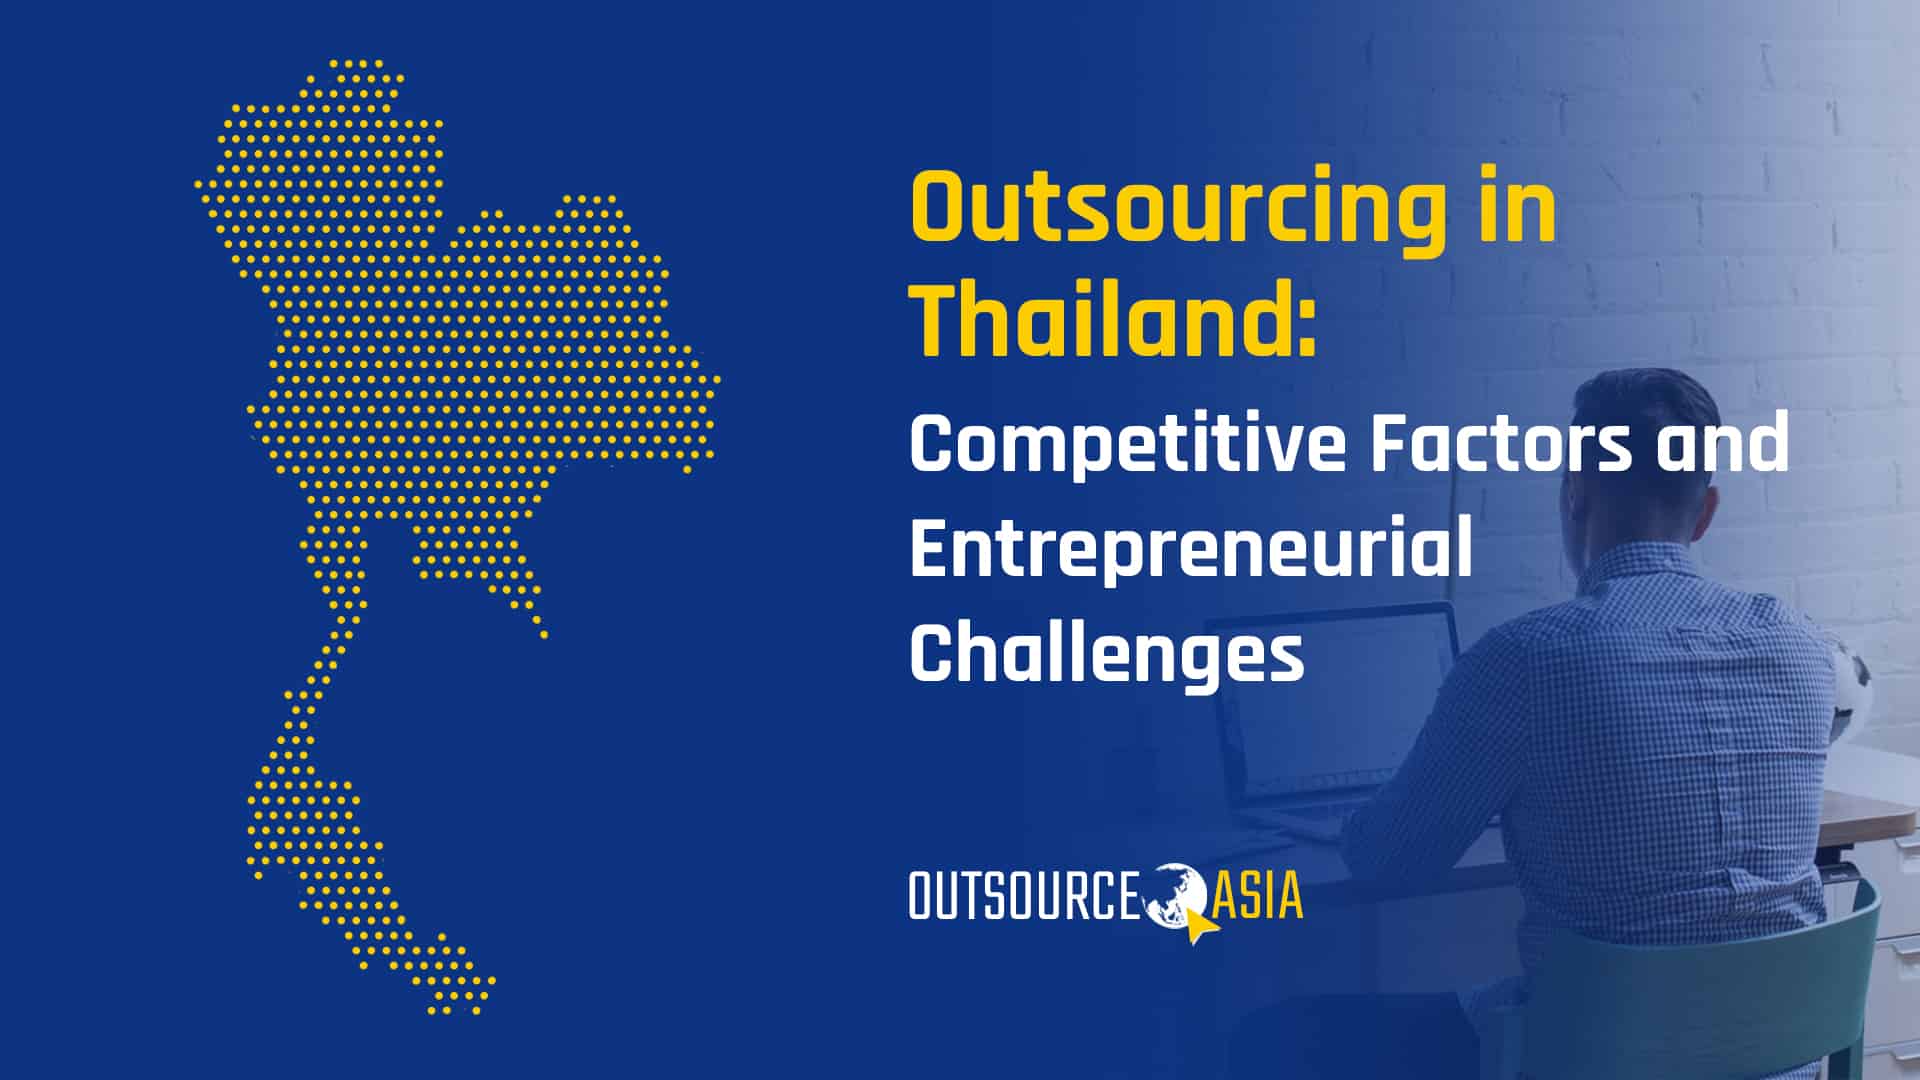 Outsourcing in Thailand